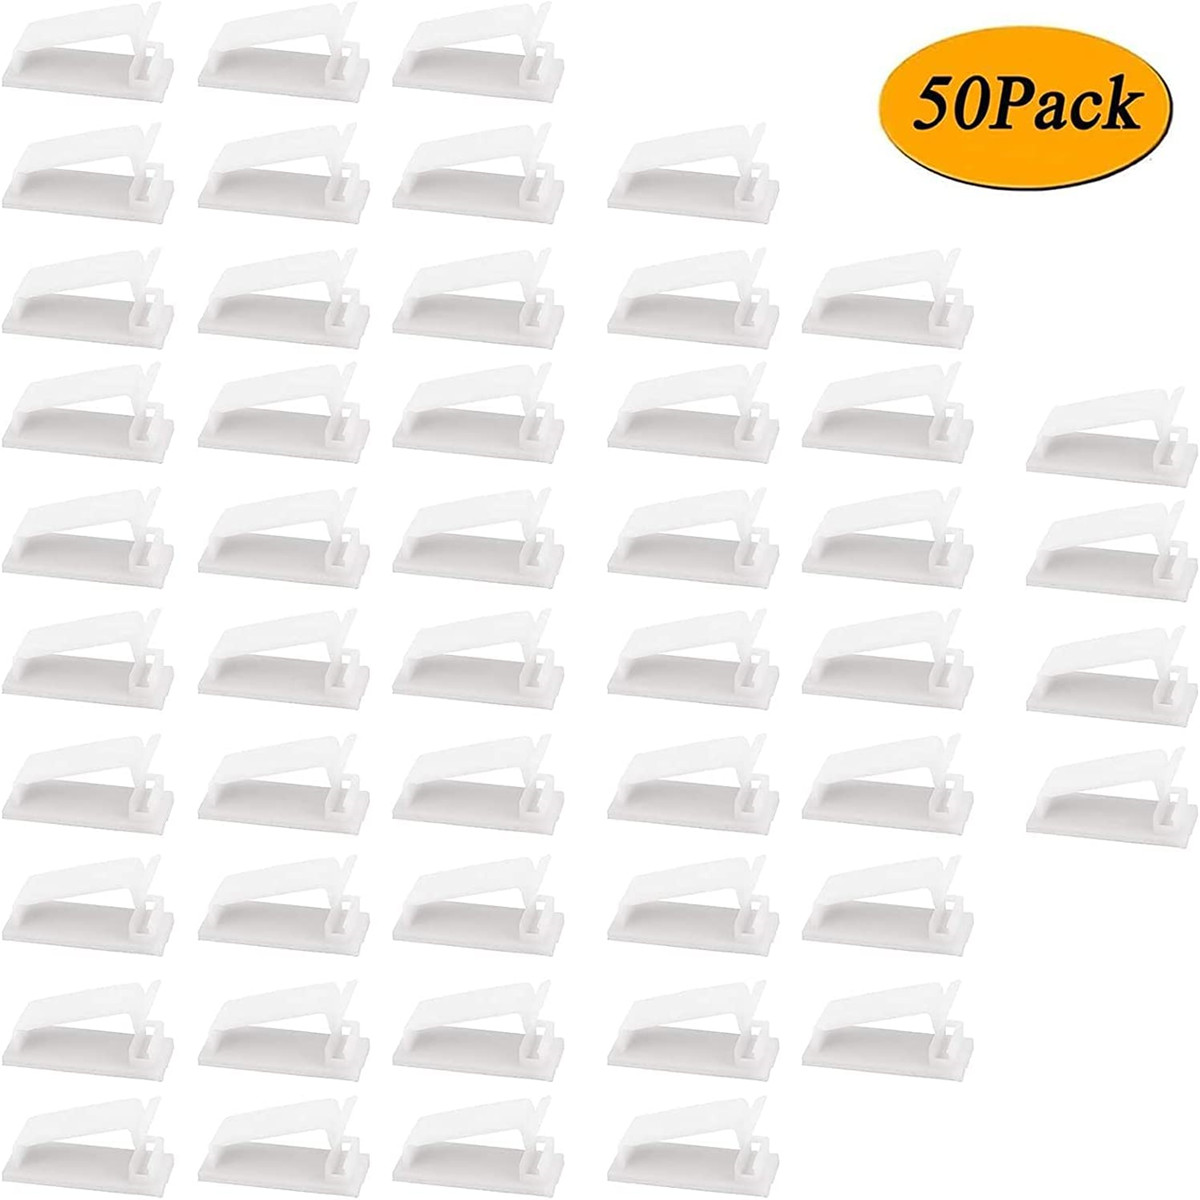 Cable Management Cable Clips, 50 PCS, White - Self-Adhesive Cable